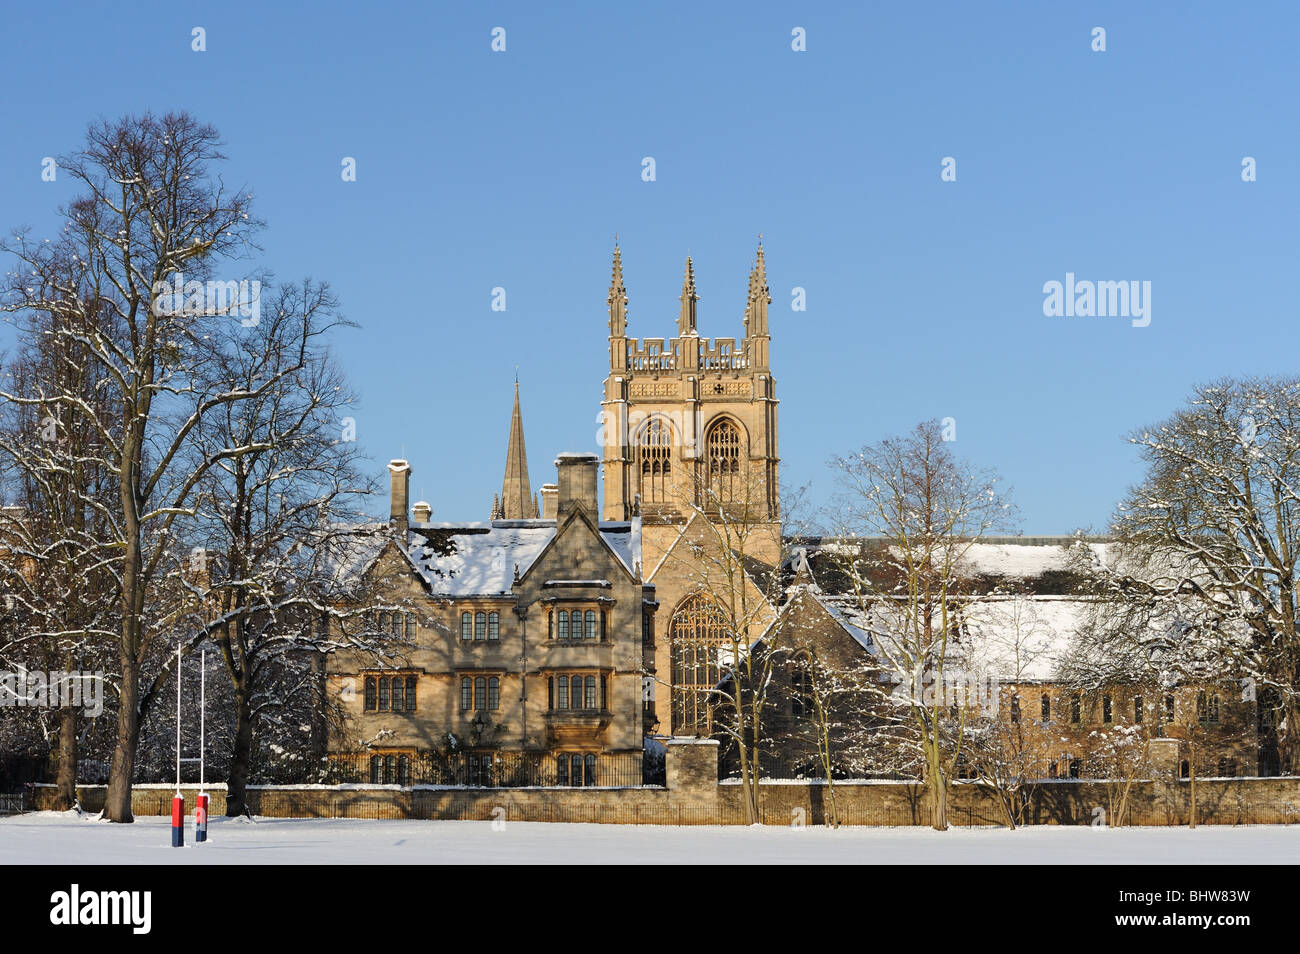 Merton College view from back, after snow Stock Photo